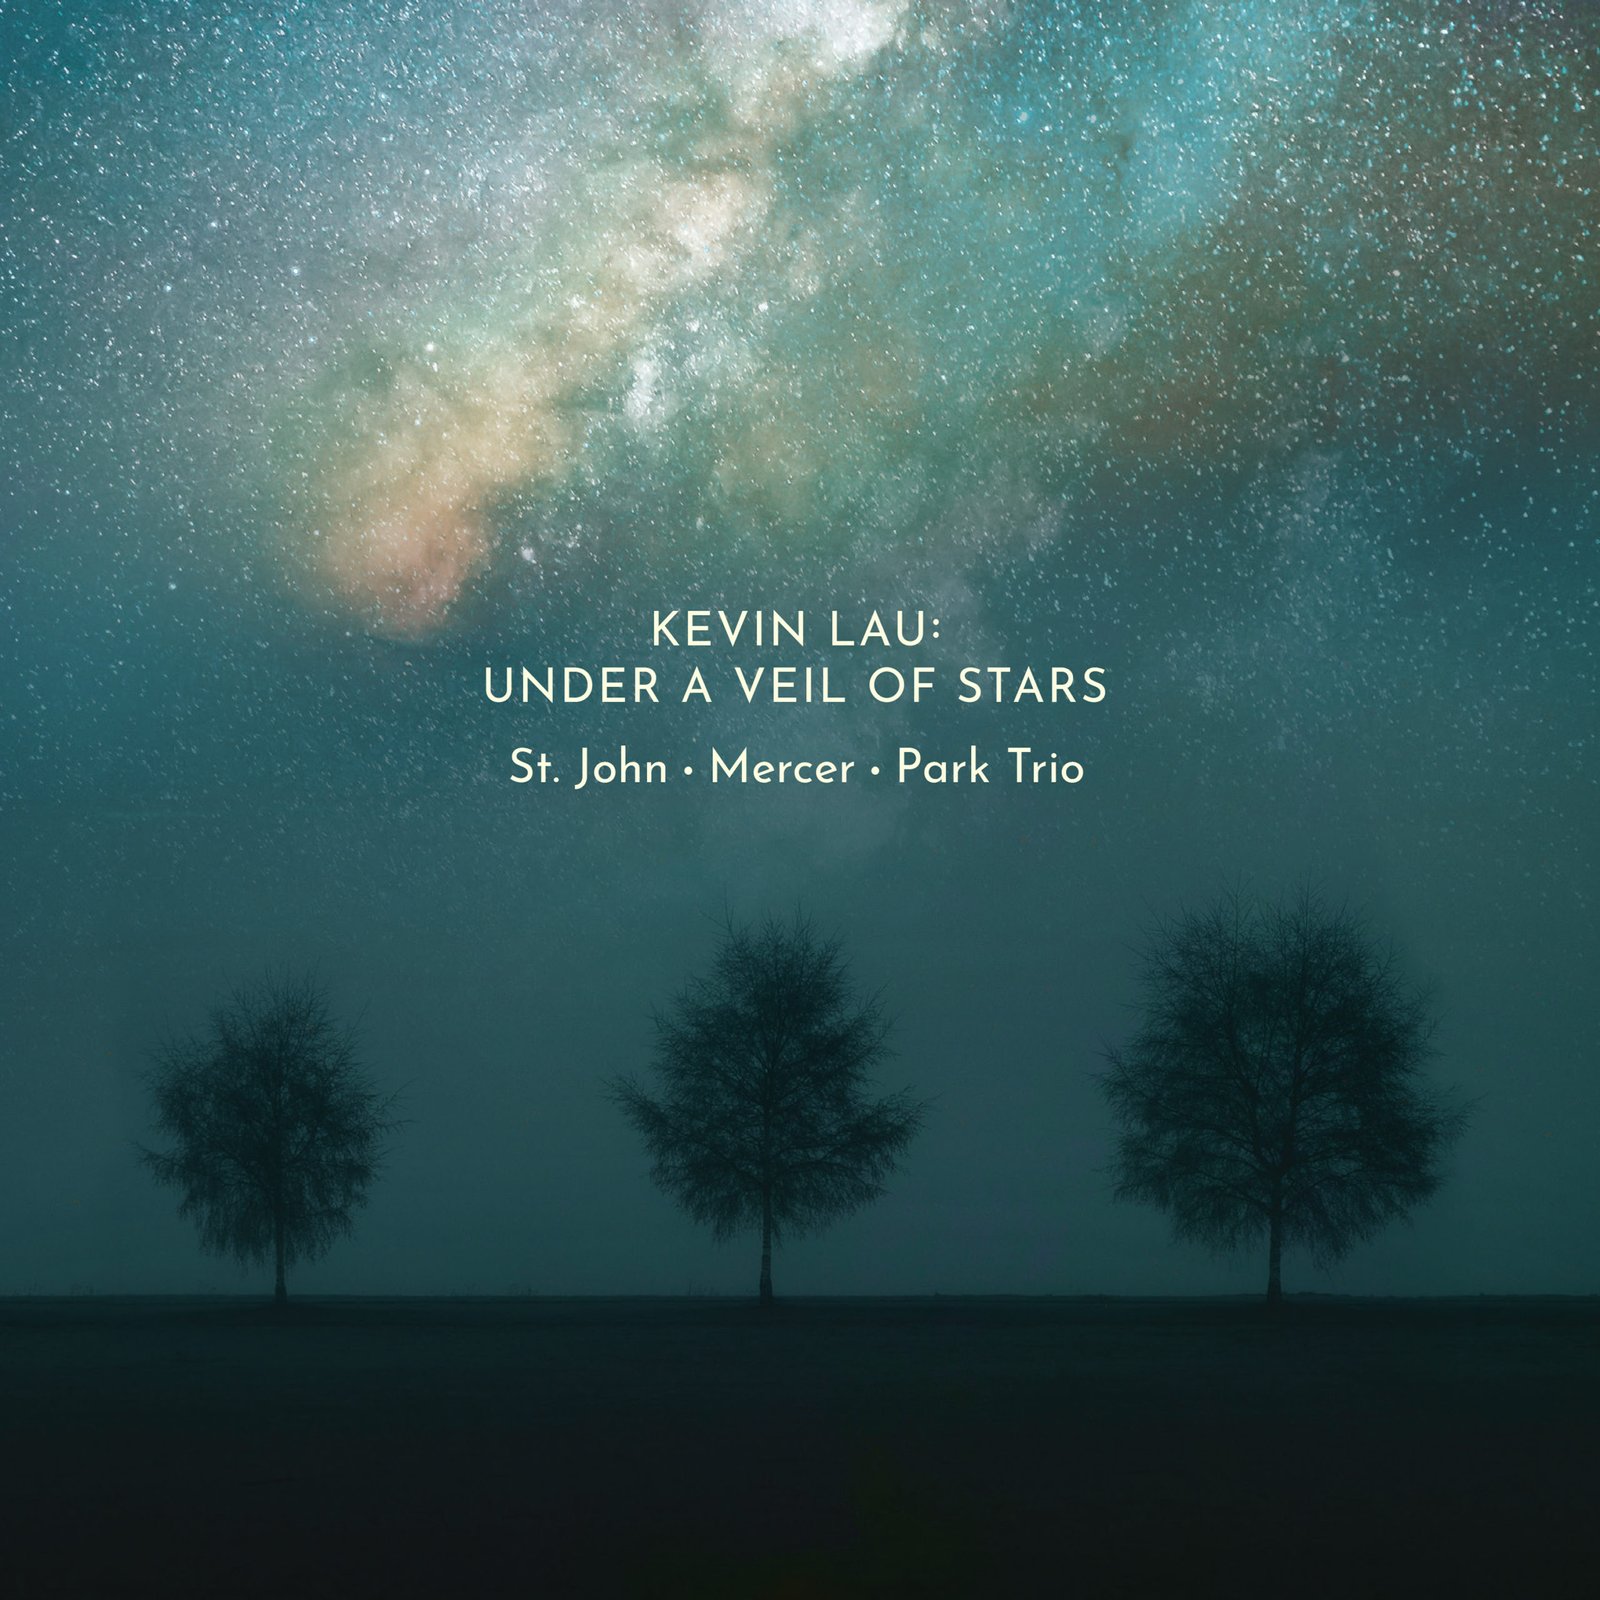 Kevin Lau: Under a Veil of Stars